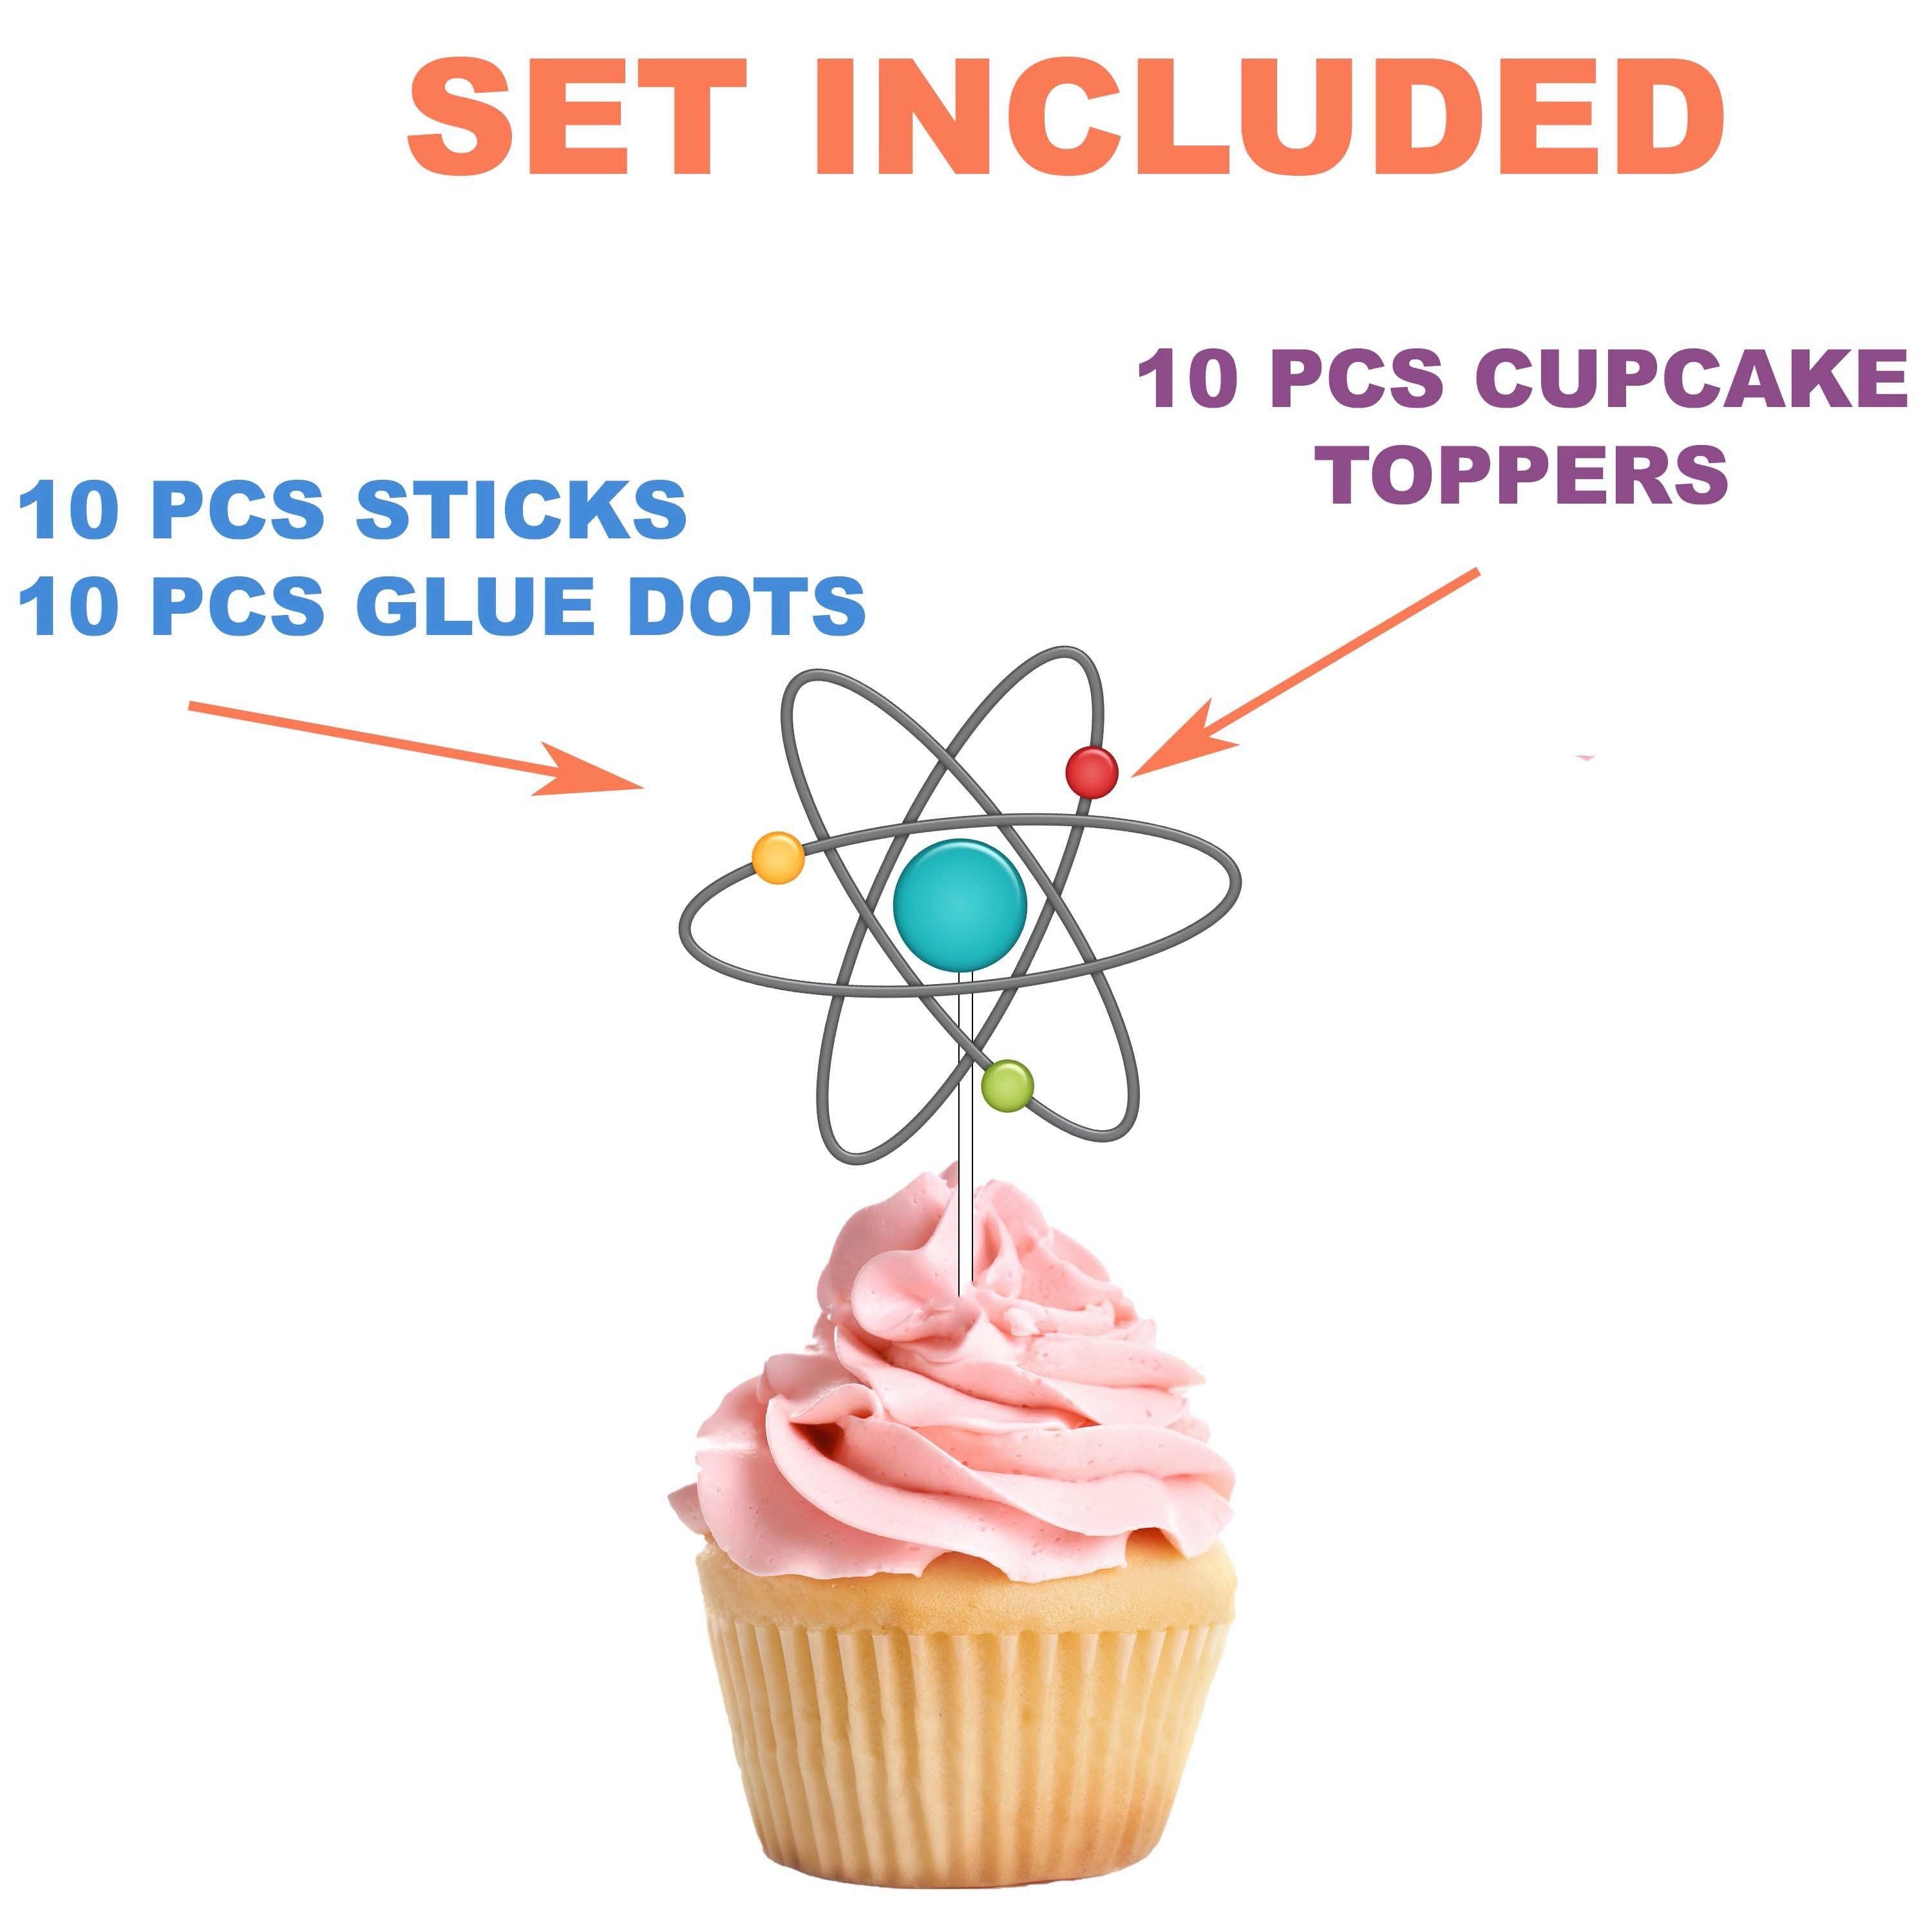 Discover & Delight with Science Cupcake Toppers - Perfect for Themed Parties & Educational Fun!